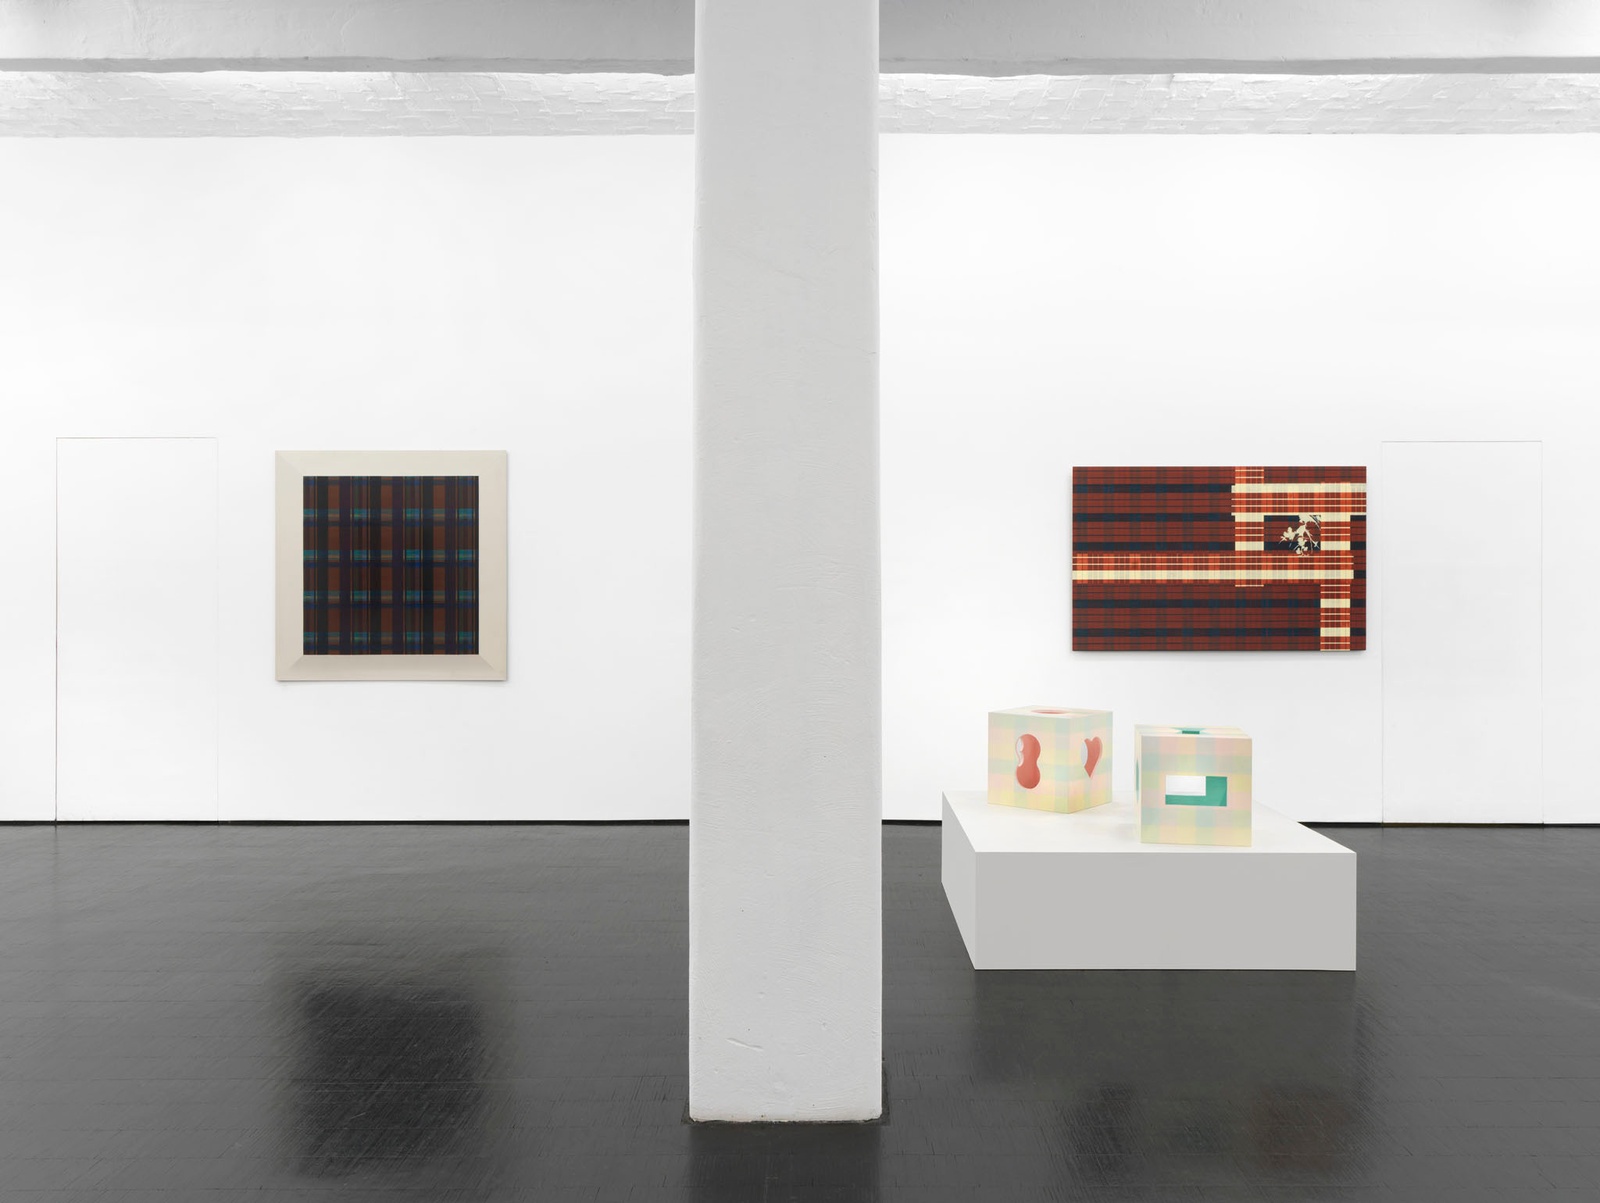 Susanne Paesler: Pattern Recognition. January 25 – February 29, 2020